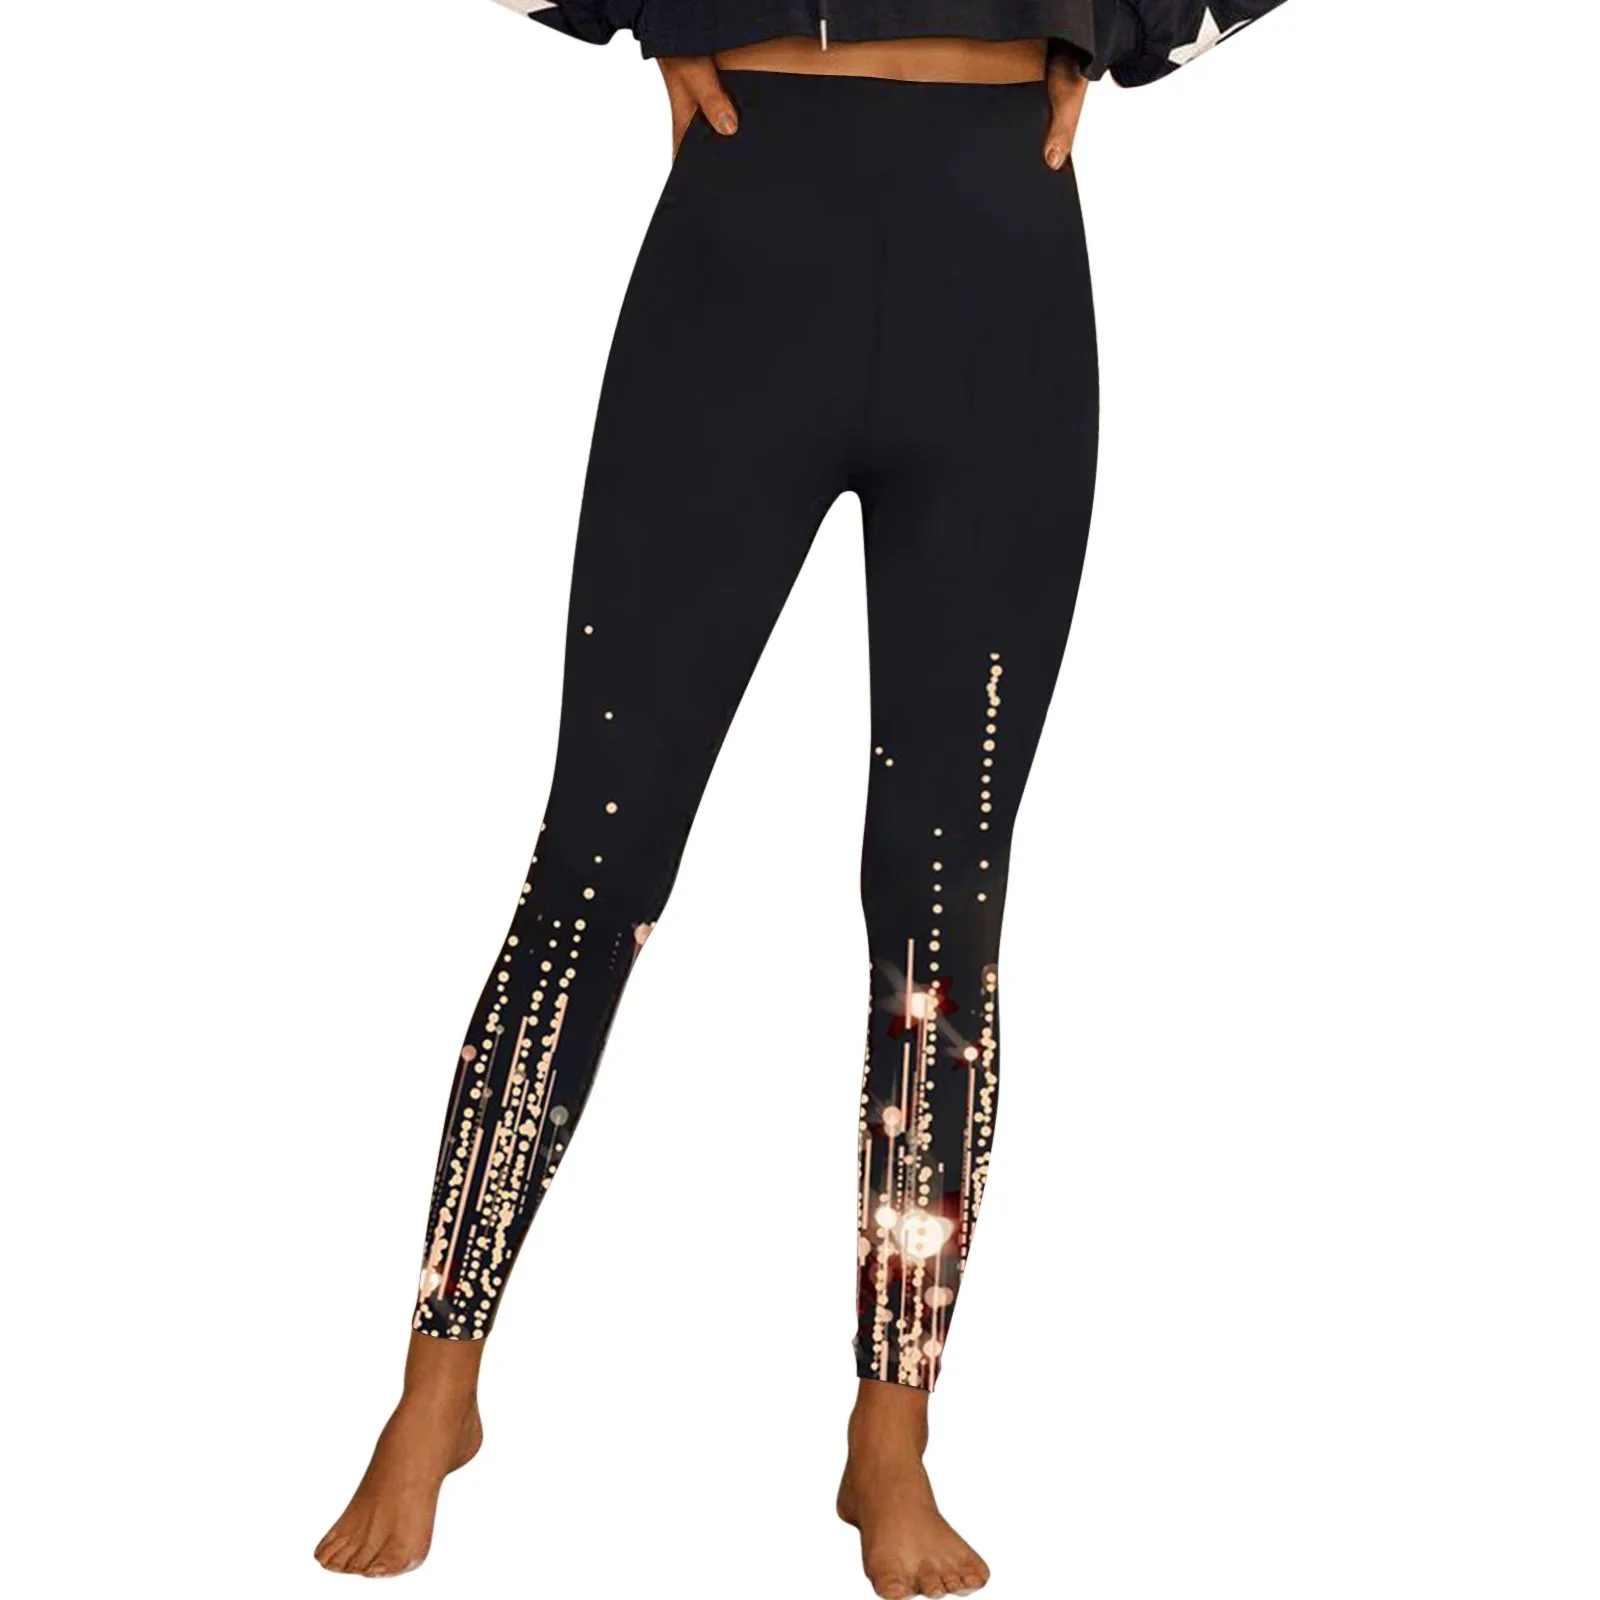 

2024 Women's Tight Fitting Elastic Waist Casual Sports Workout Pants Long Fashionable Print Trousers Outwear Yoga Costume